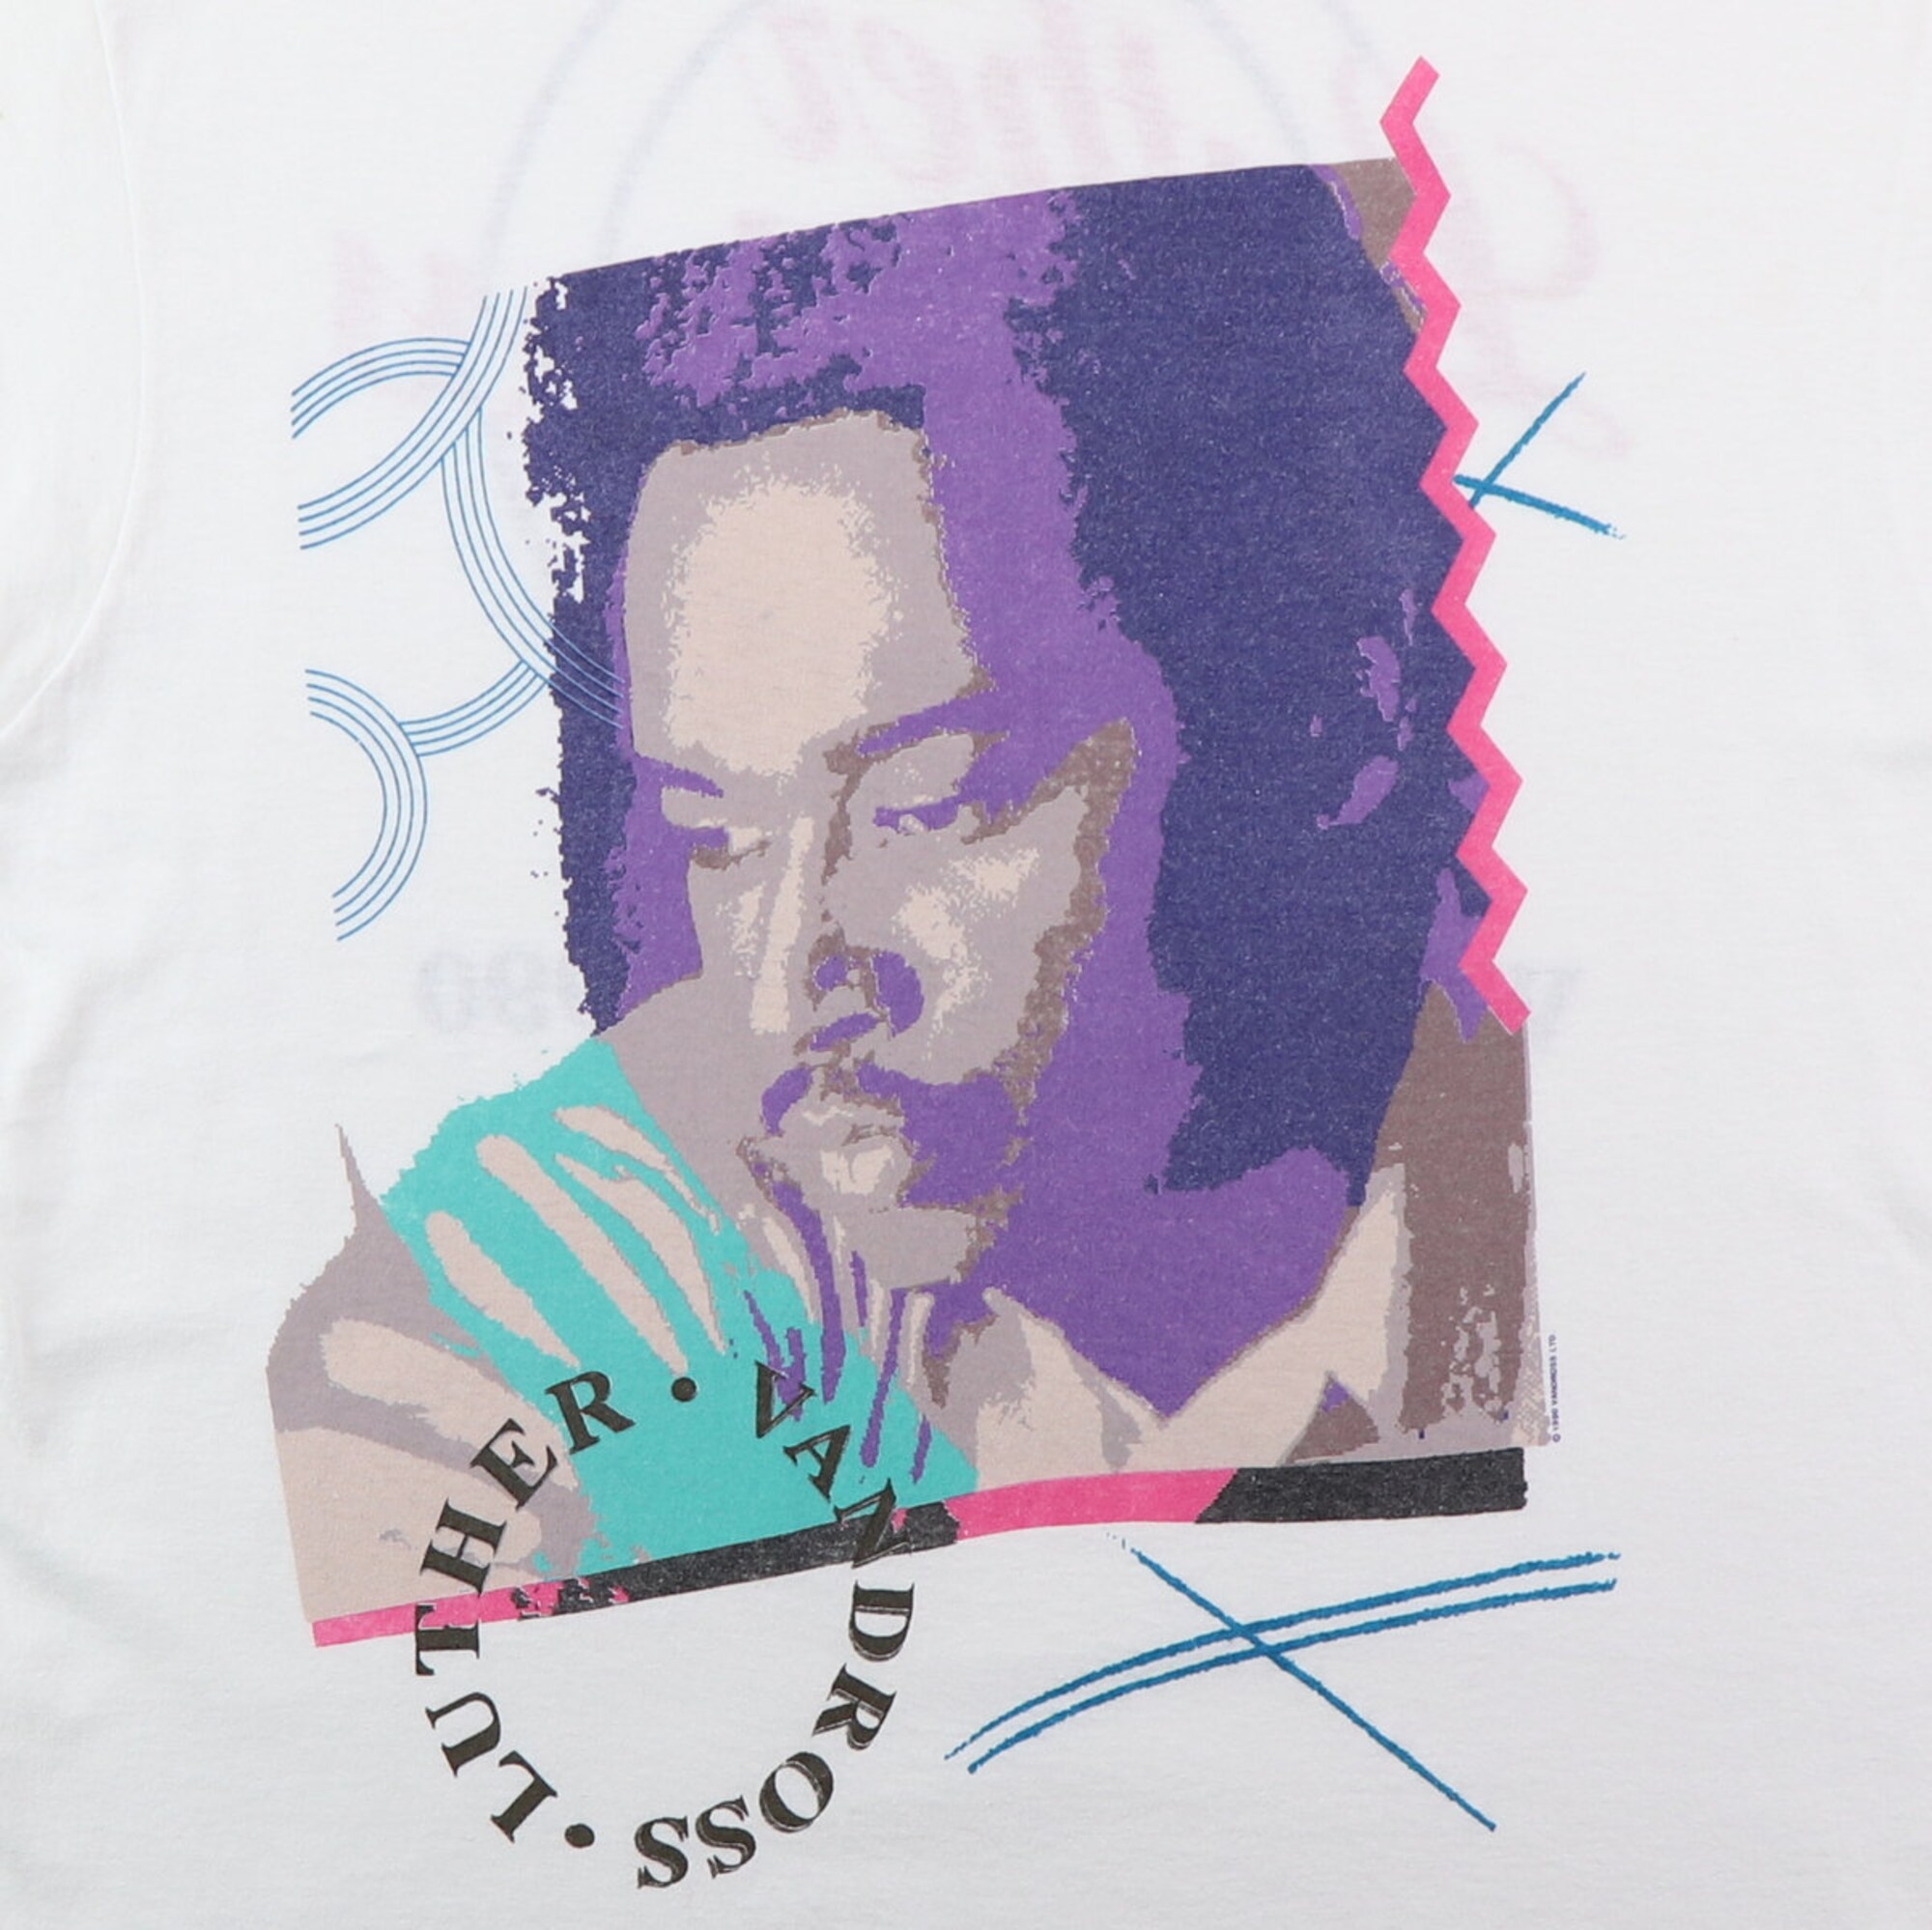 vintage 1990 Luther Vandross Here & Now World Tour Shirt